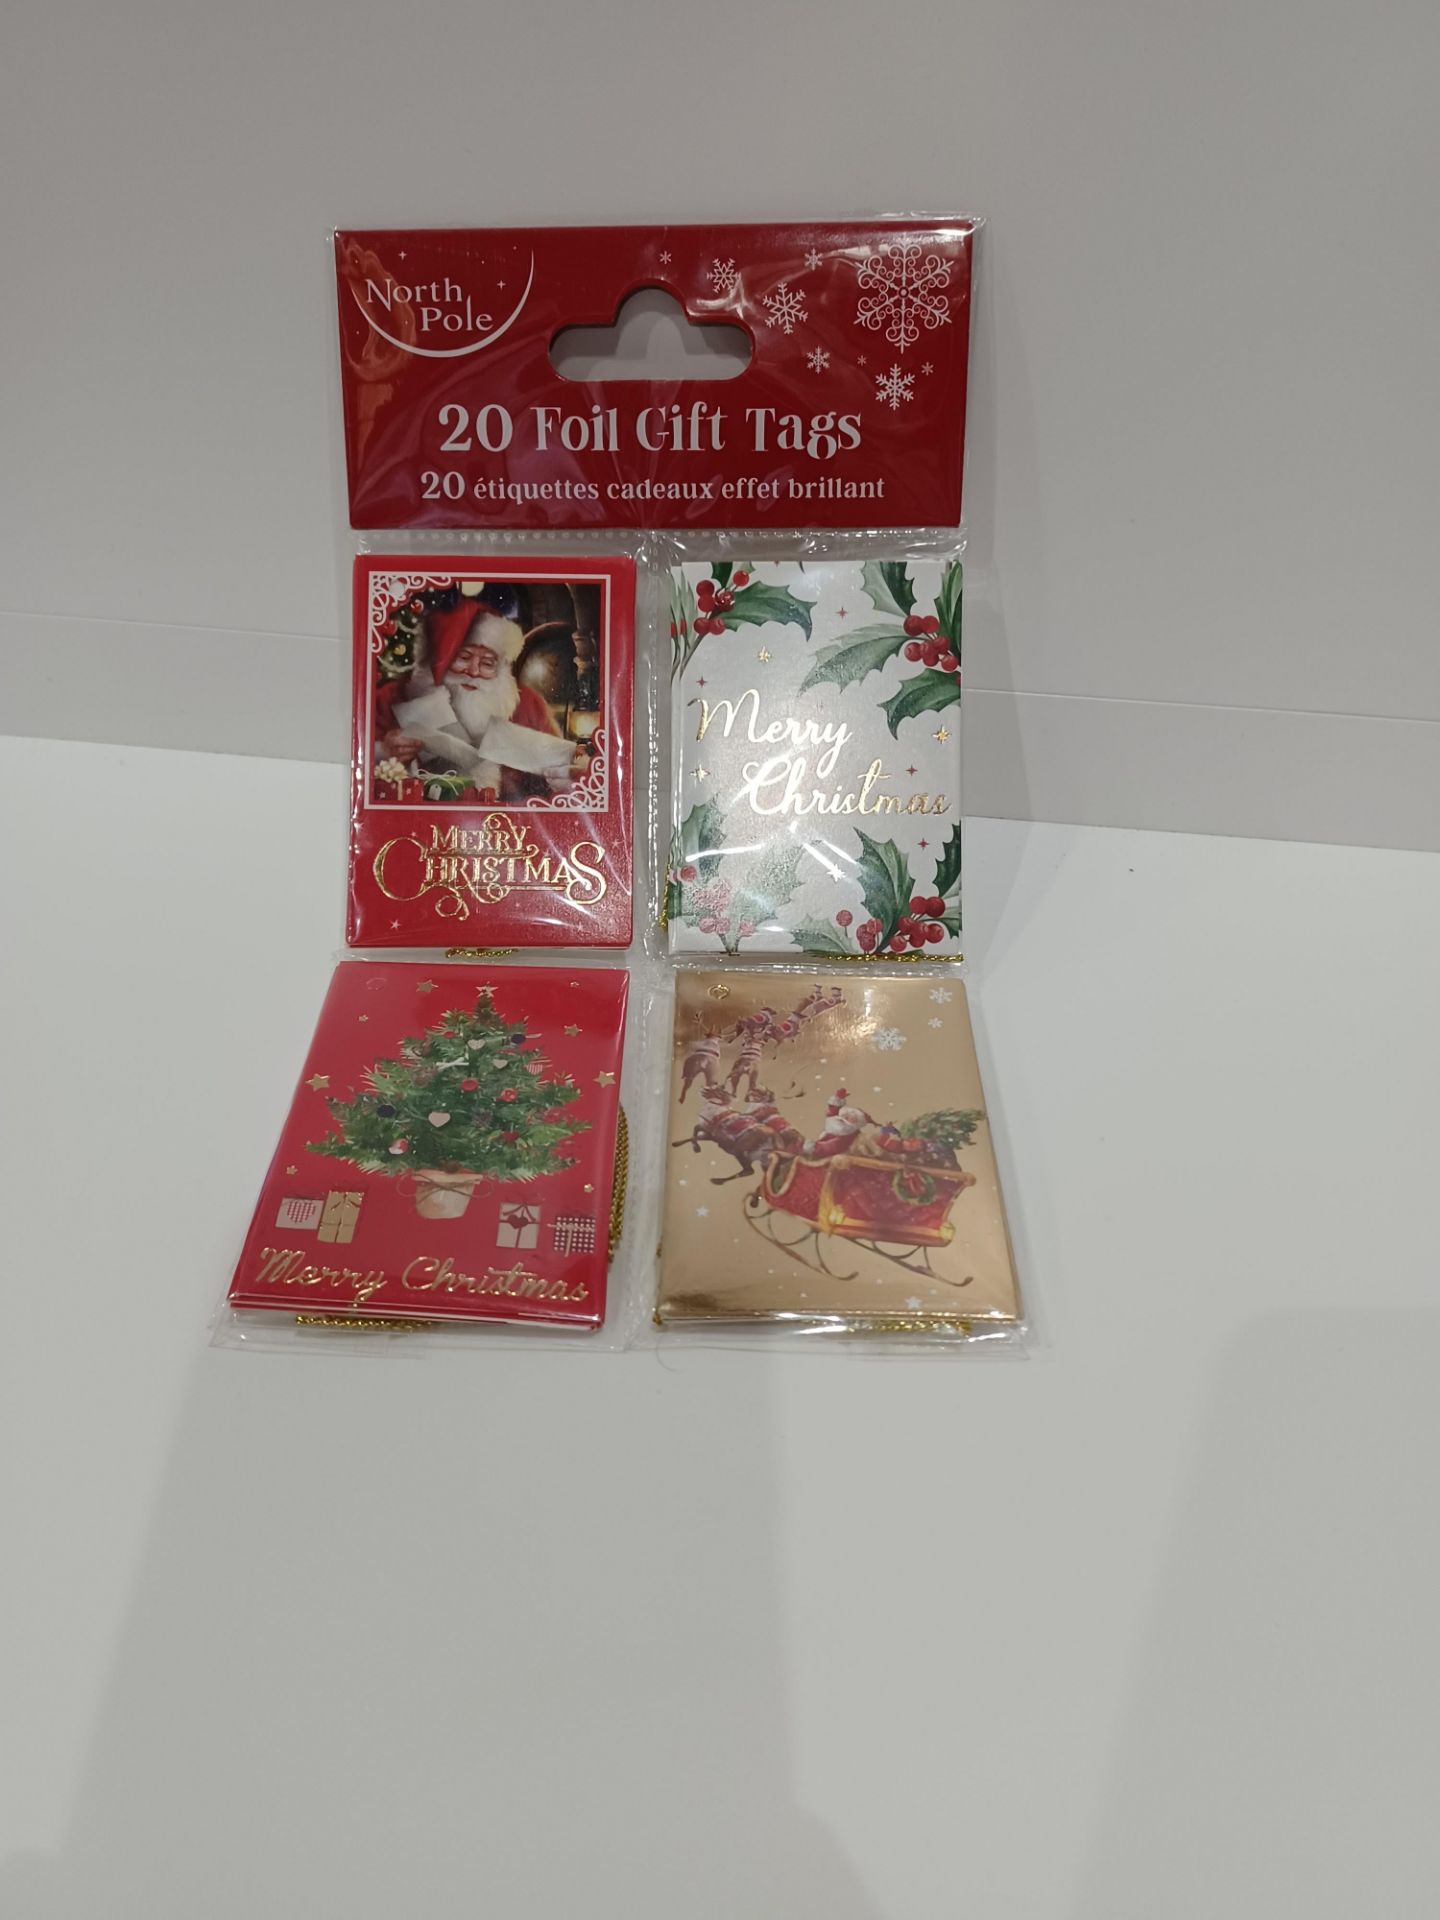 96 X NEW PACKAGED PACKS OF 20 NORTH POLE FOIL GIFT TAGS. ROW 15 B/W